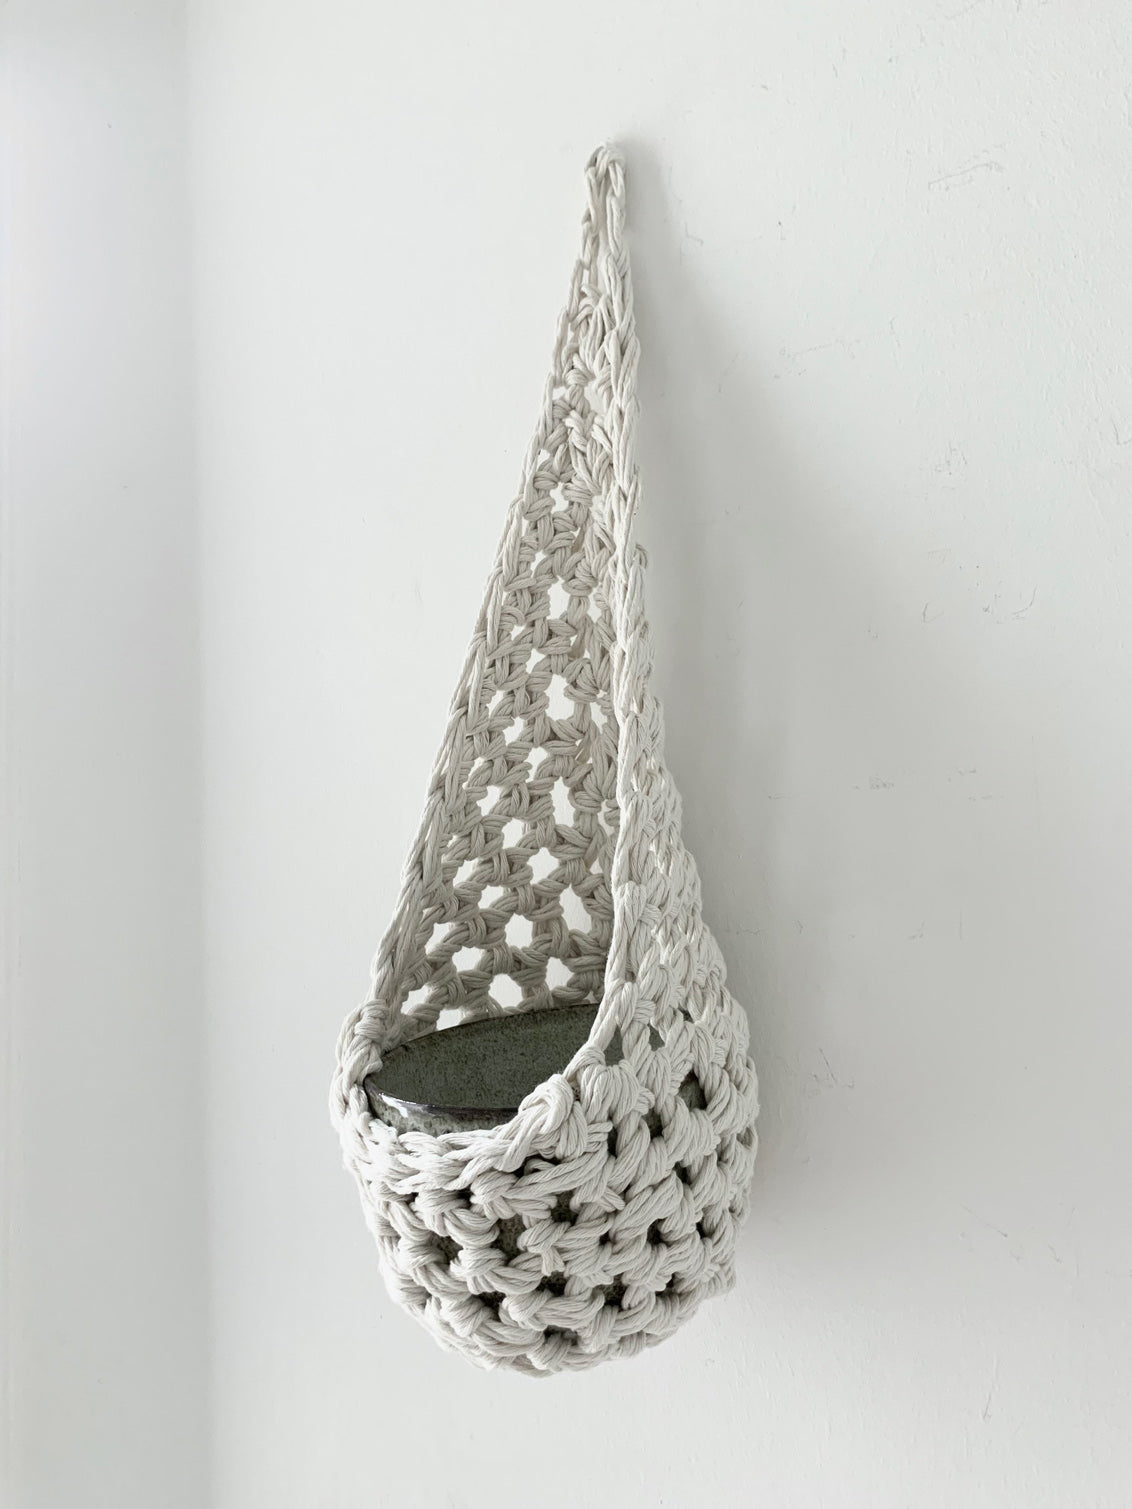 Image of single white cotton crochet hanging wall planter against a wall of a bedroom. The photo shows the planter with a cermaic pot, in order to demonstate tierdrop shape of design. Hanging by a small nail in the wall.